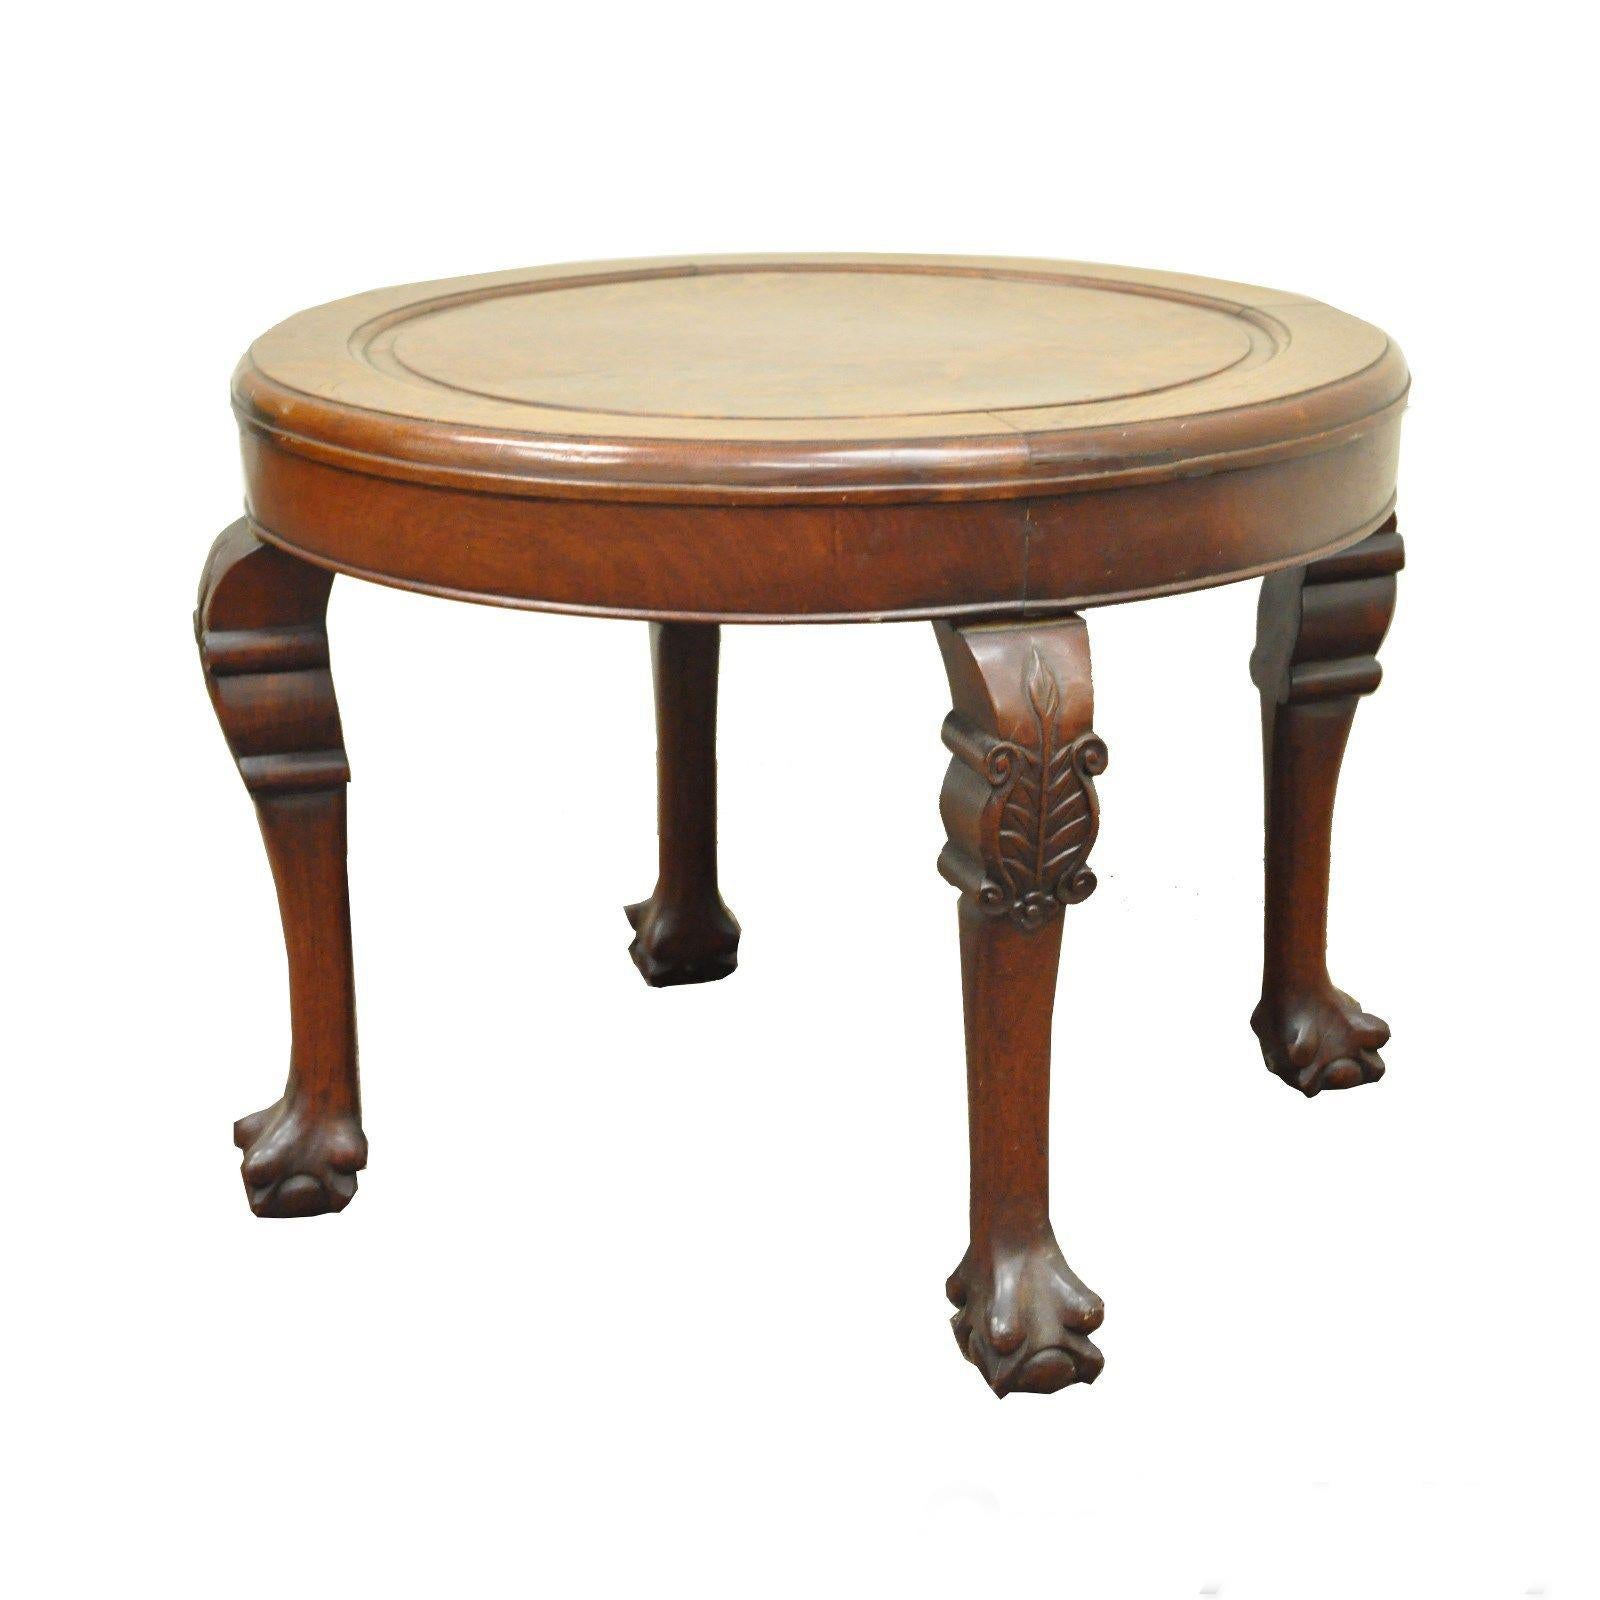 FREE DELIVERY NEW SOLID MAHOGANY CHIPPENDALE DESIGN LARGE ROUND TABLE 